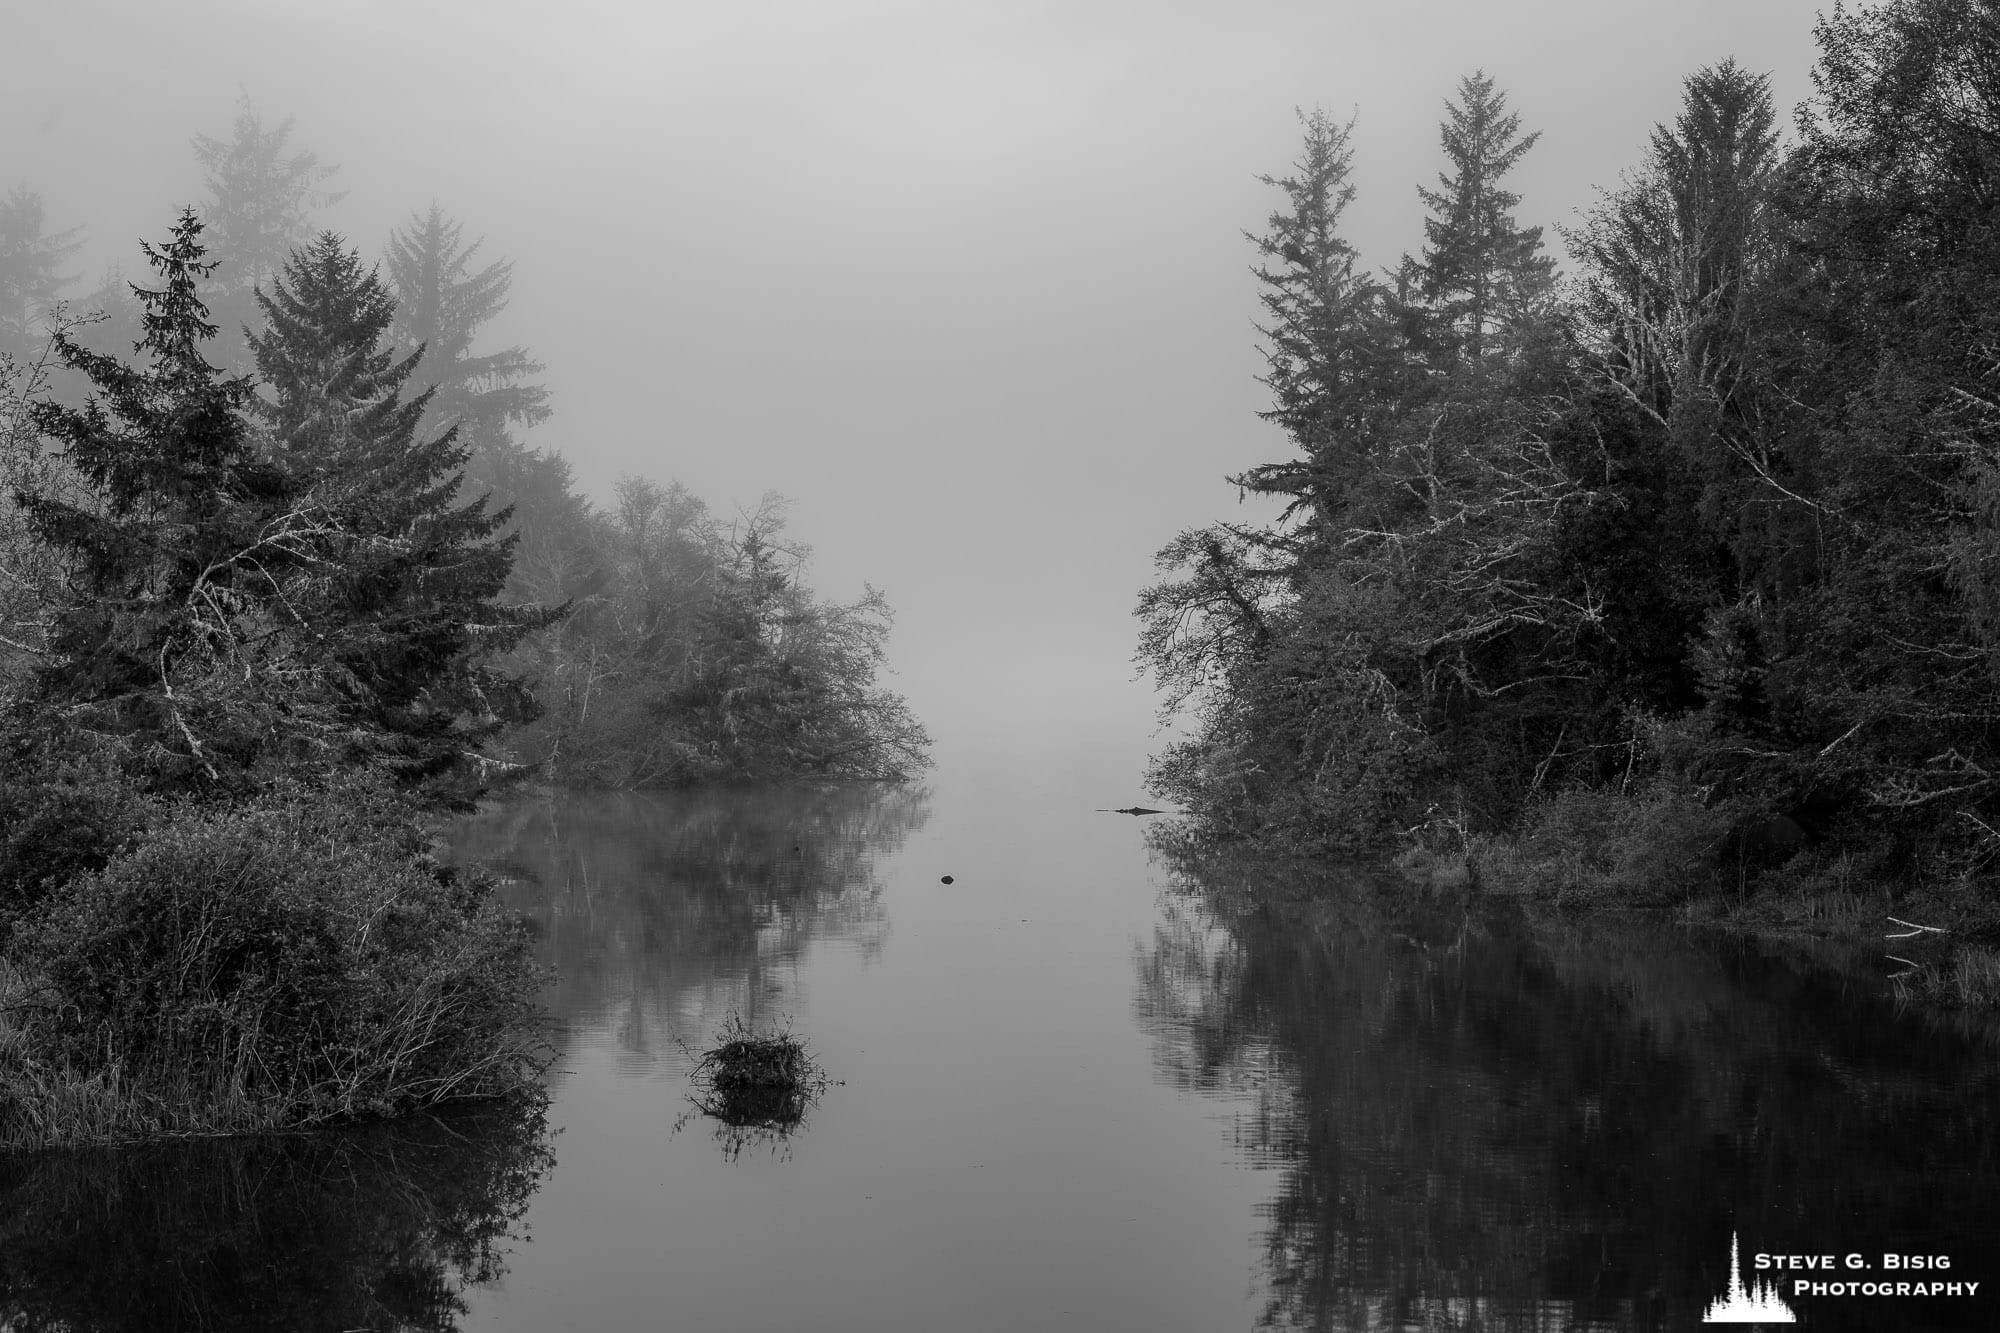 A black and white landscape photograph of Crooked Creek near its mouth along the Columbia River, Washington.